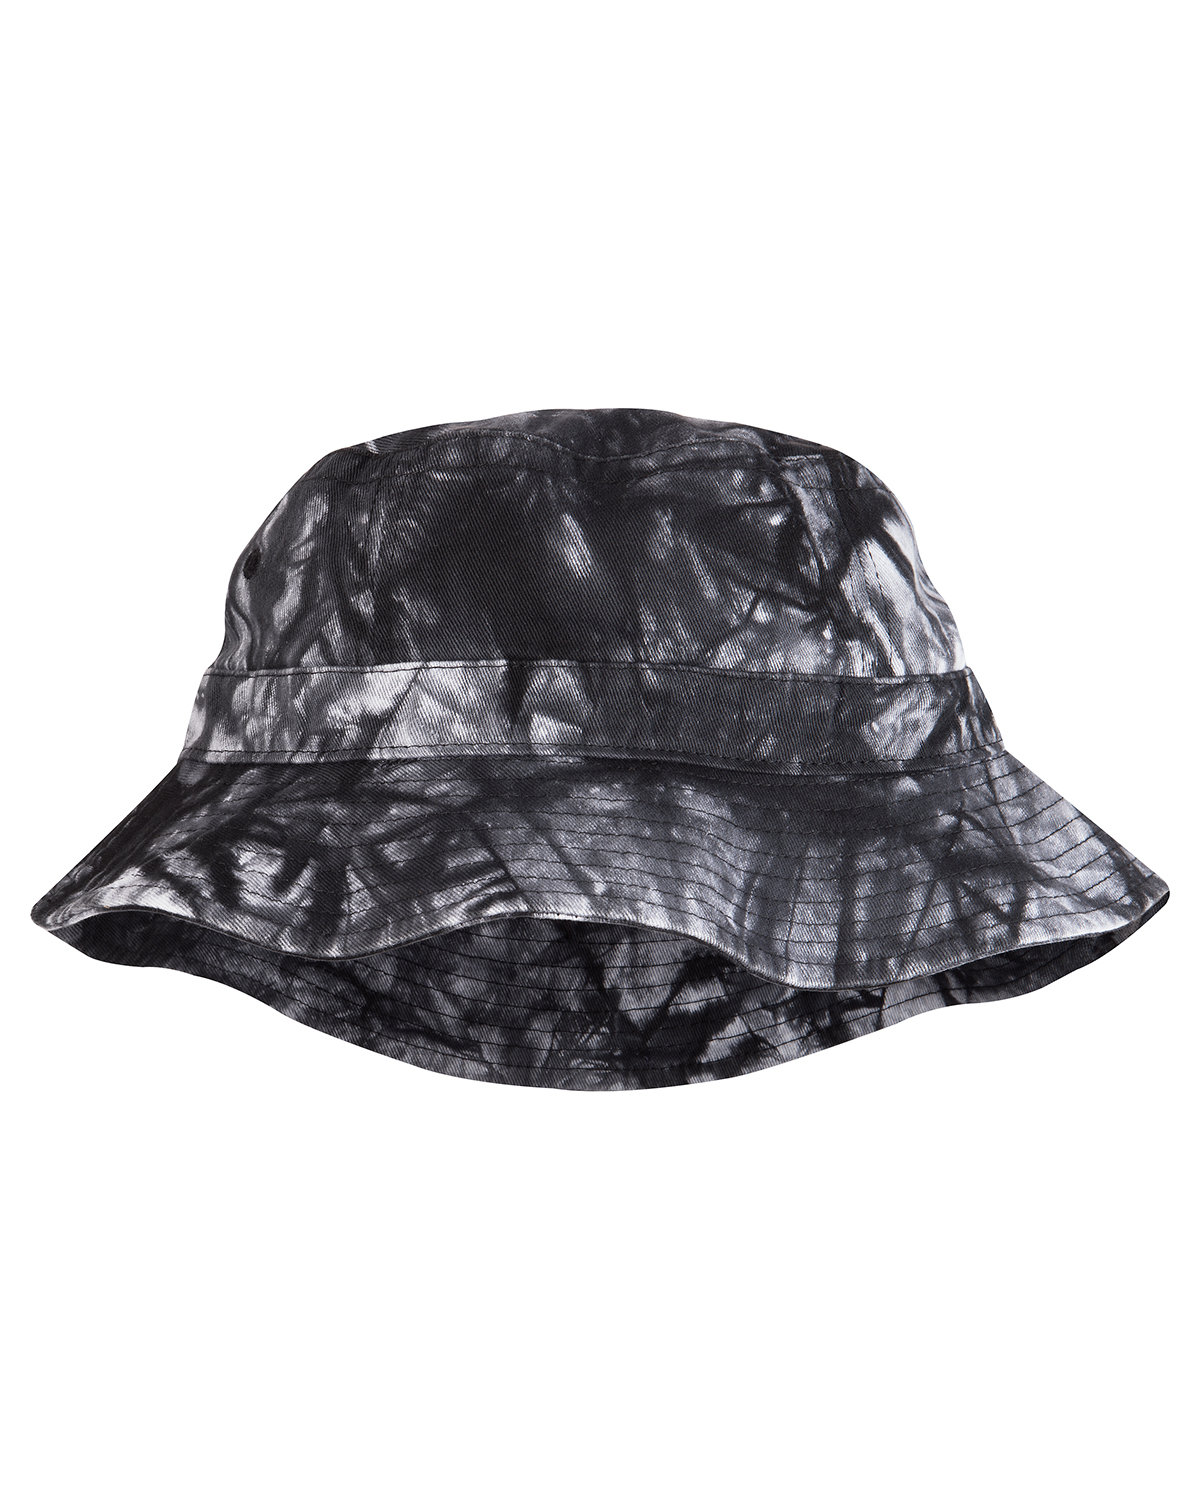 Cameo Pigment Dyed Bucket Hat